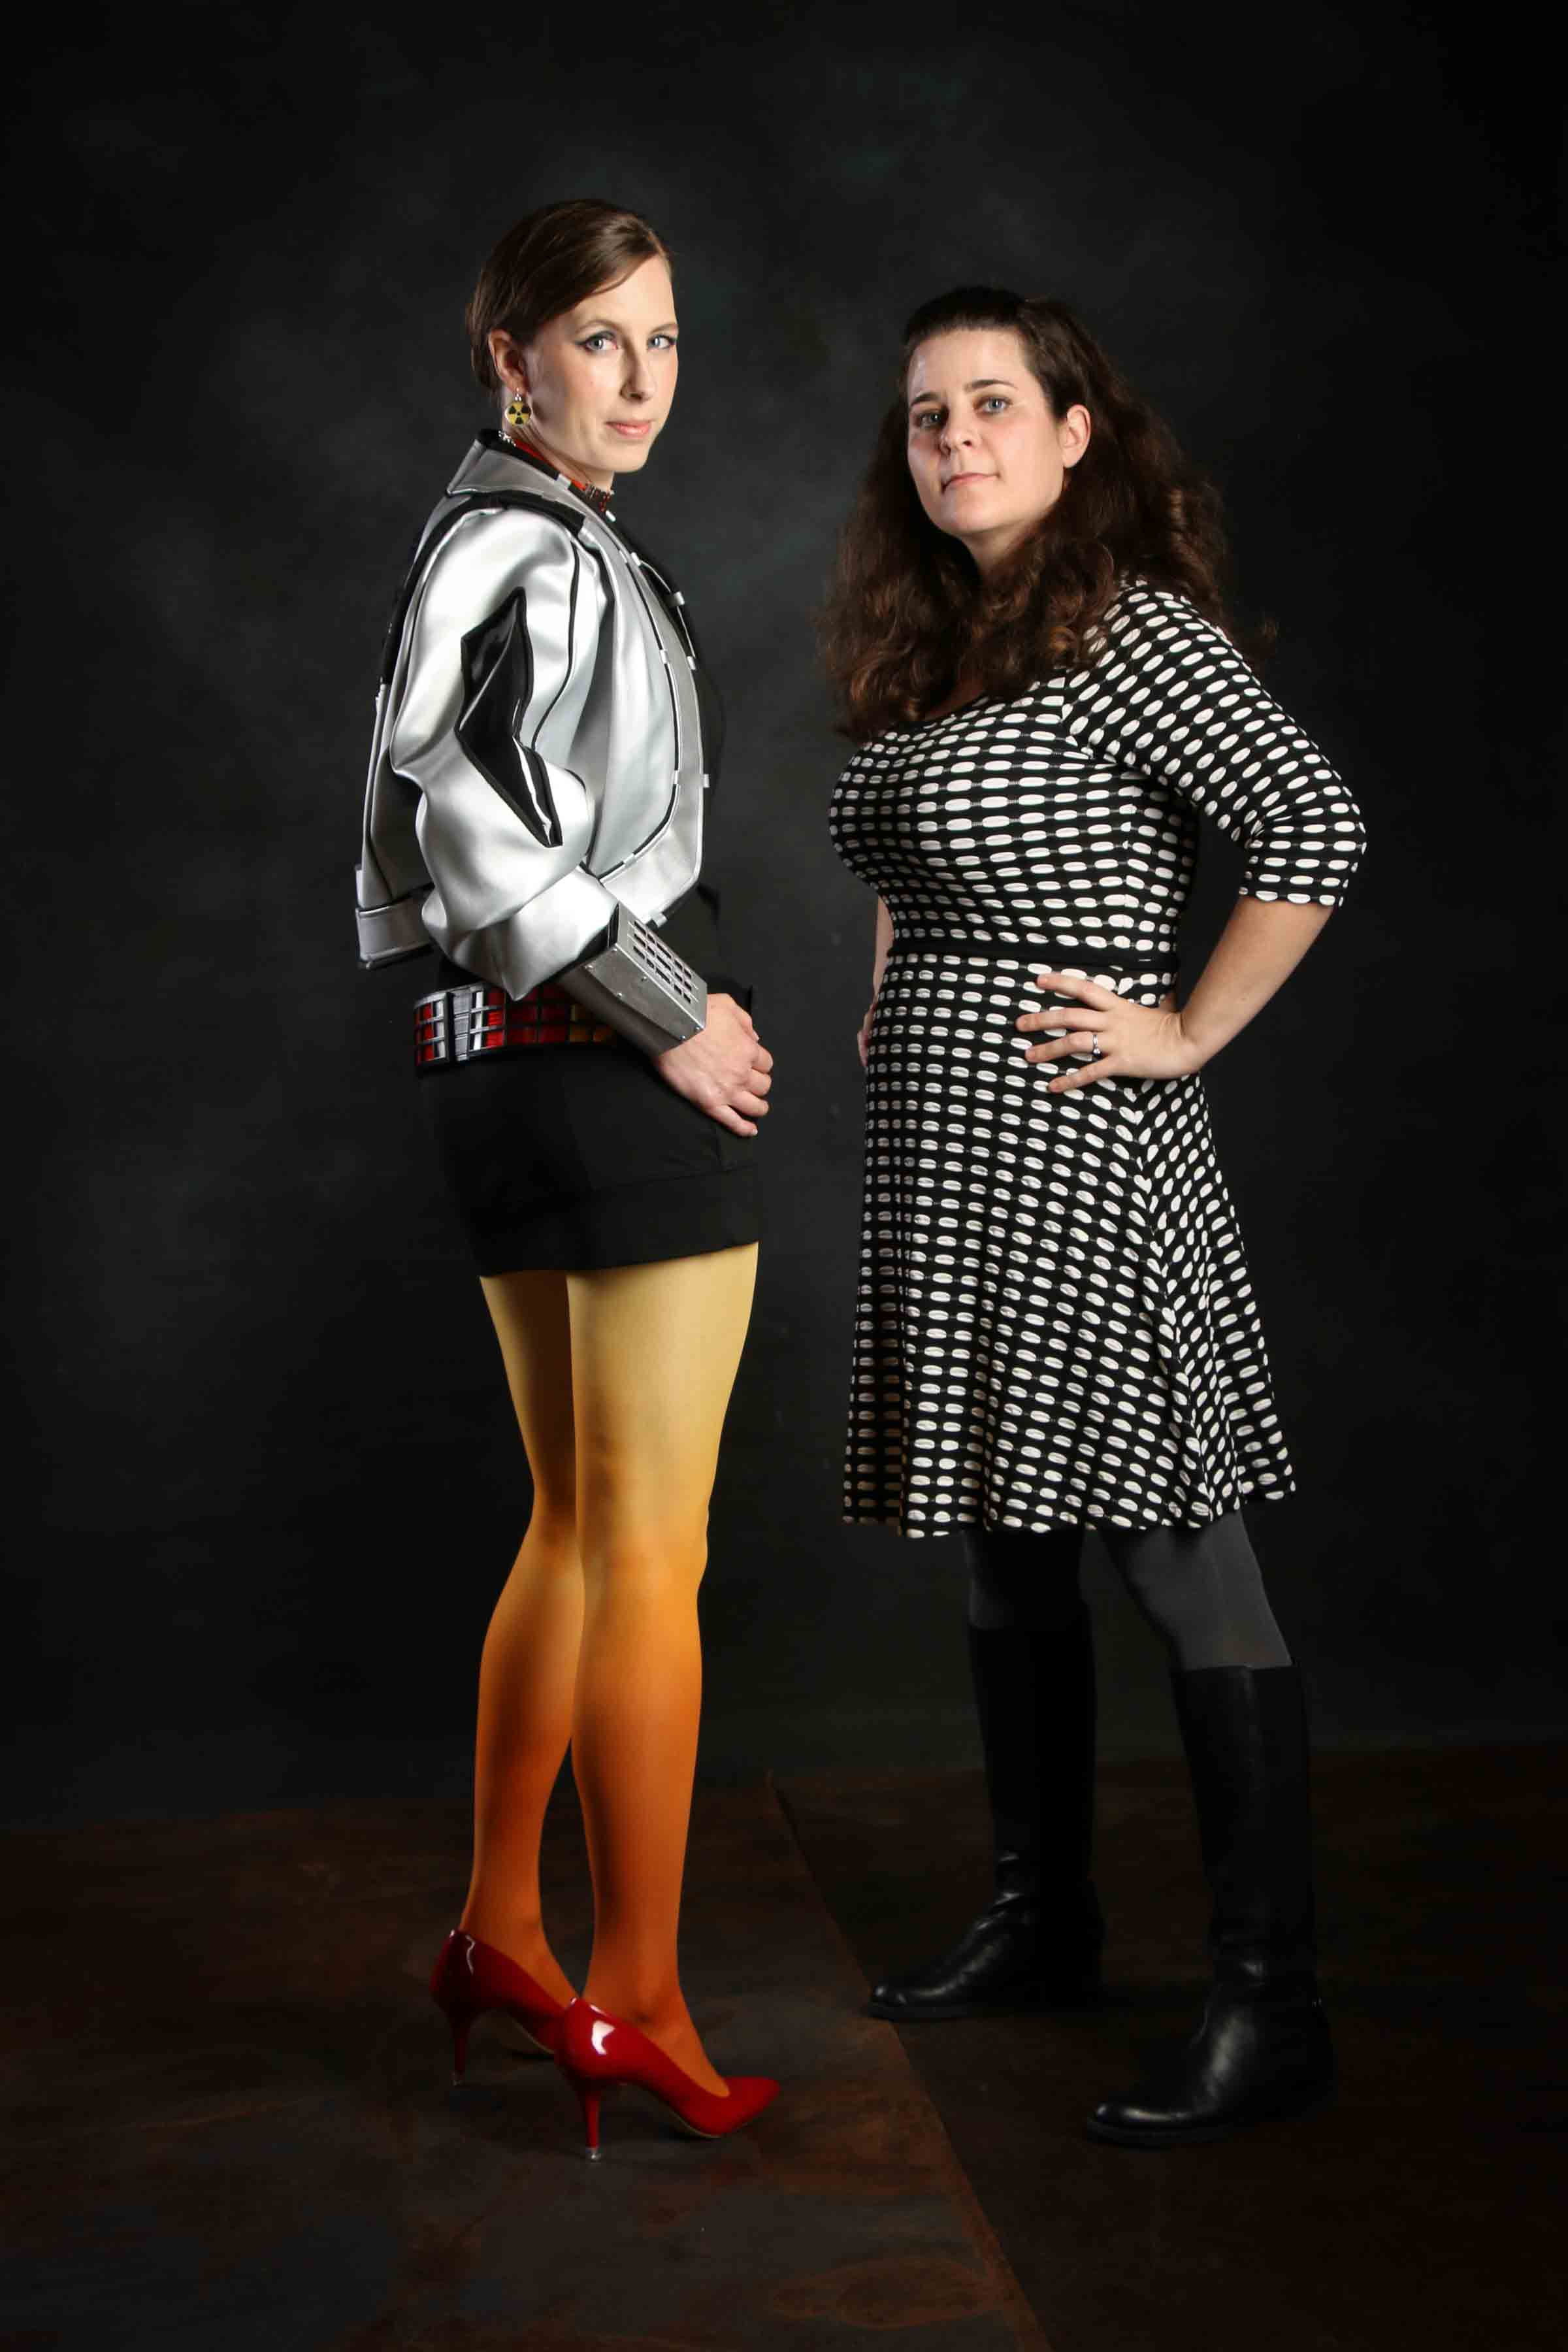 Her Universe Fashion Show designer, Amy Beth Christenson, poses with the model wearing her celebrity judge-chosen winning design based on Back to the Future.